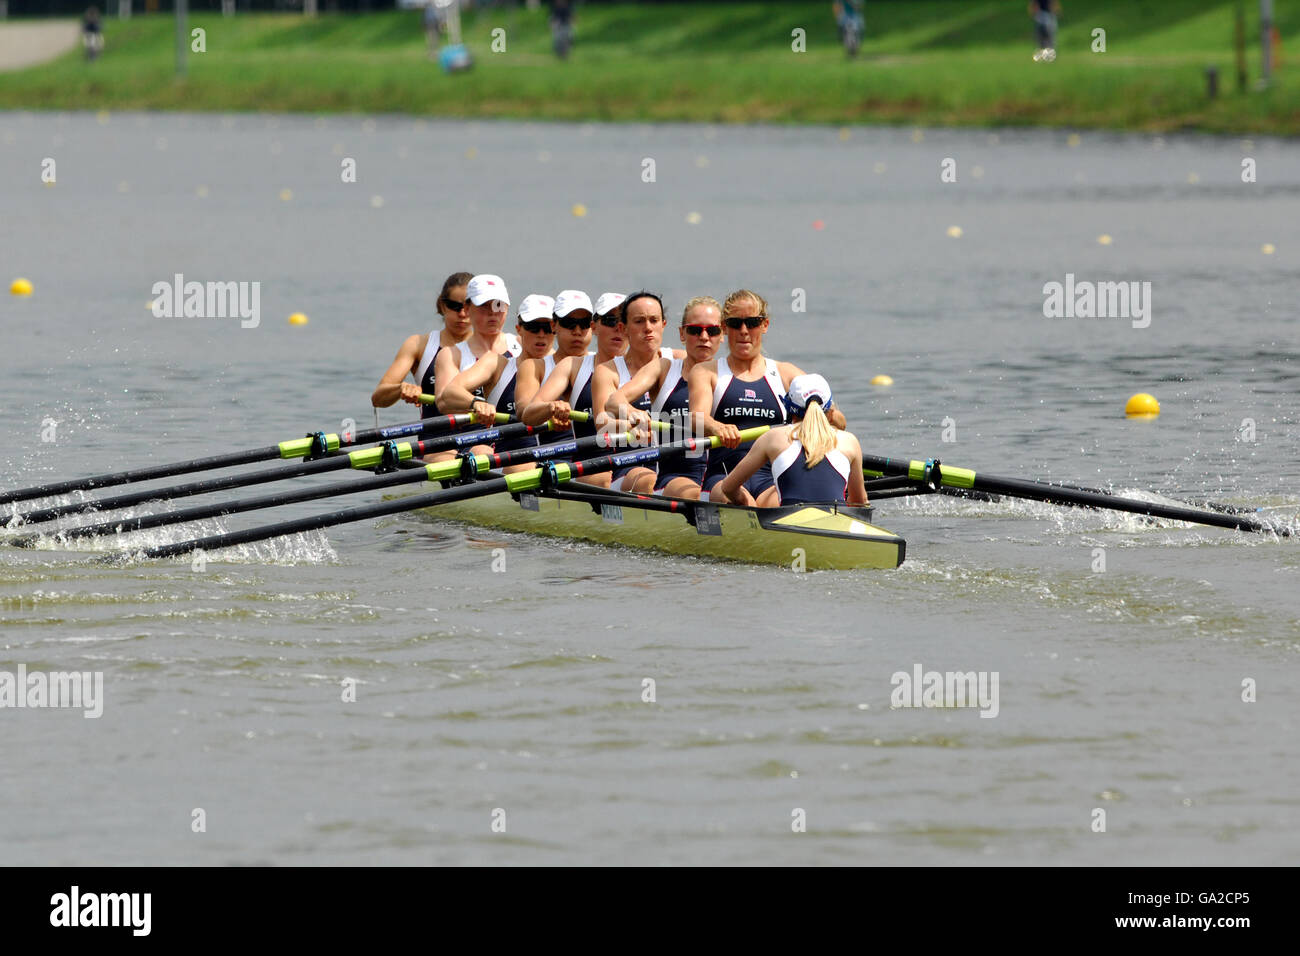 (front to back) Great Britain's Caroline O'Conner, Louisa Reeve, Katie Greves, Natasha Page, Beth Rodford, Jessica-Jane Eddie, Georgina Menheneott, Carla Ashford and Baz Moffat compete in the women's eight - heat 1 Stock Photo